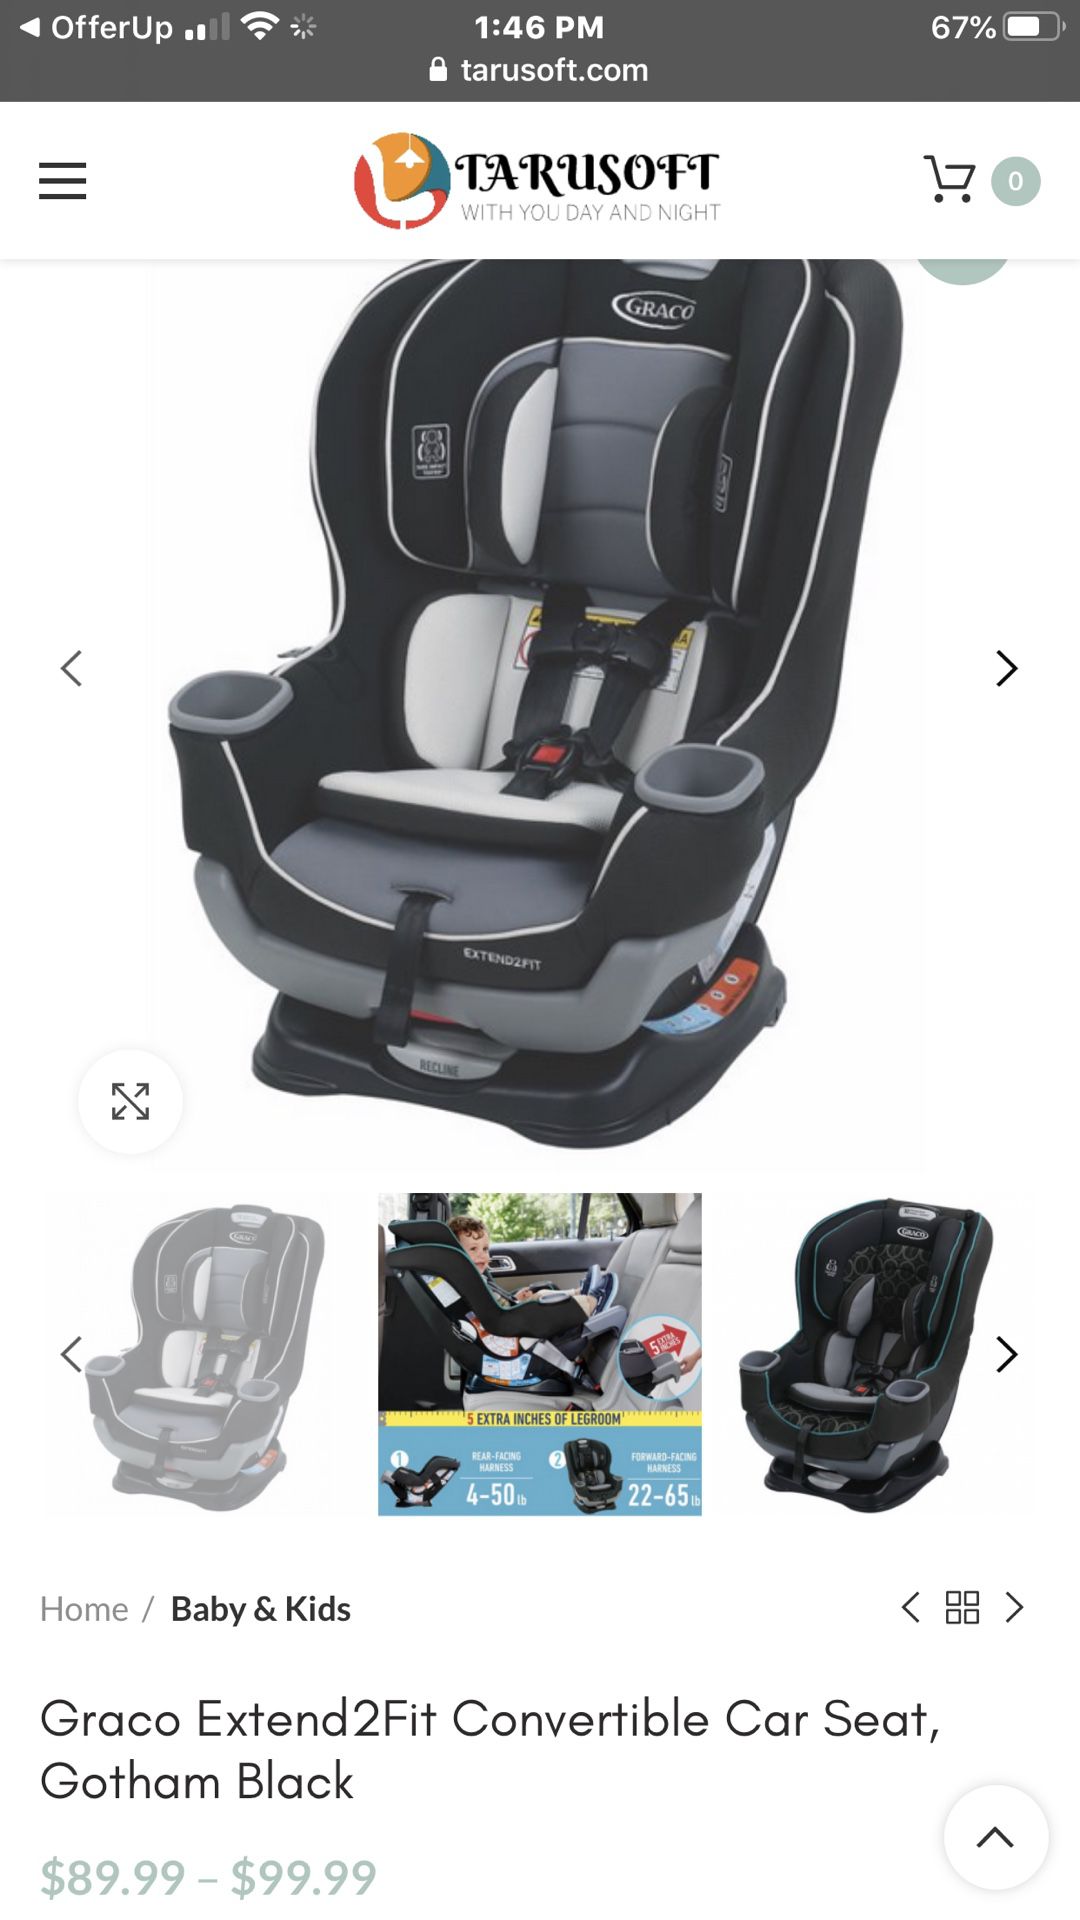 Garco extended car seat